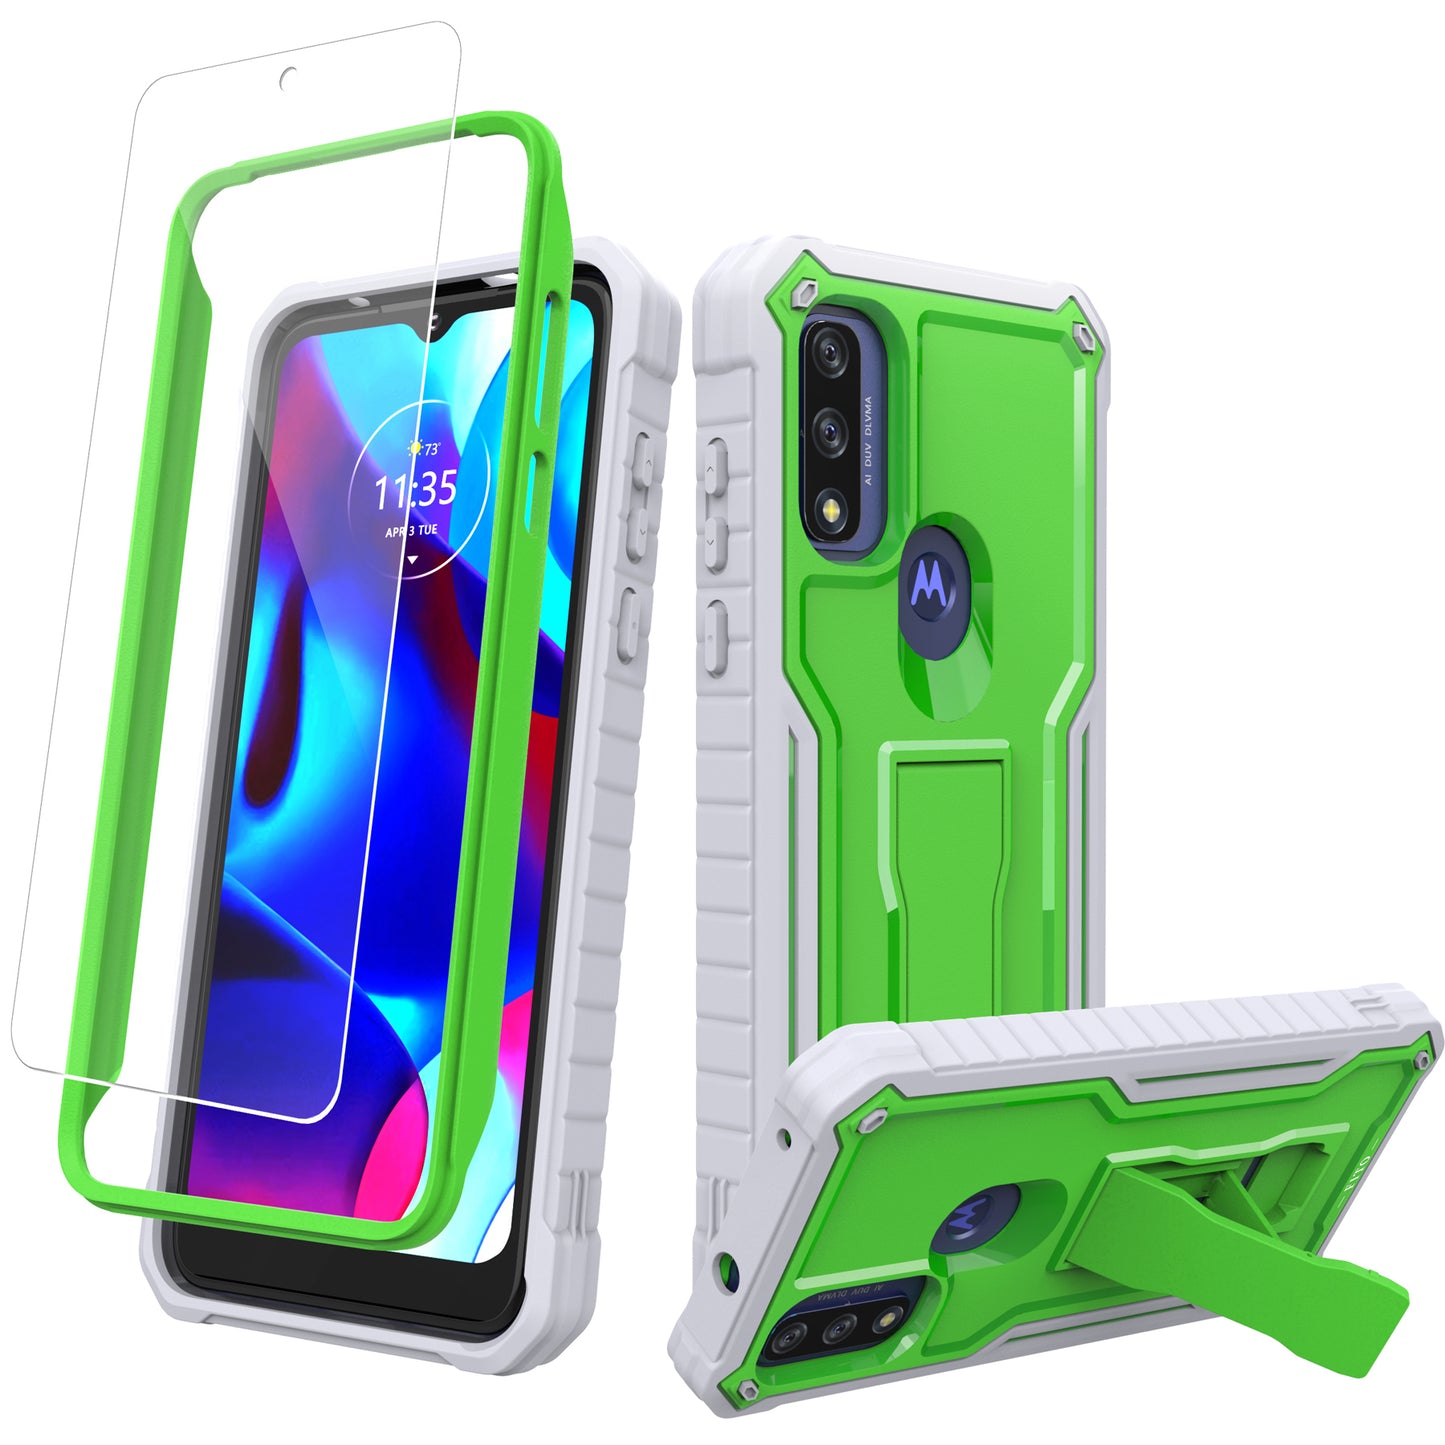 FITO for Moto G Pure Case, Dual Layer Shockproof Heavy Duty Case with a Glass Screen Protector, Built-in Kickstand